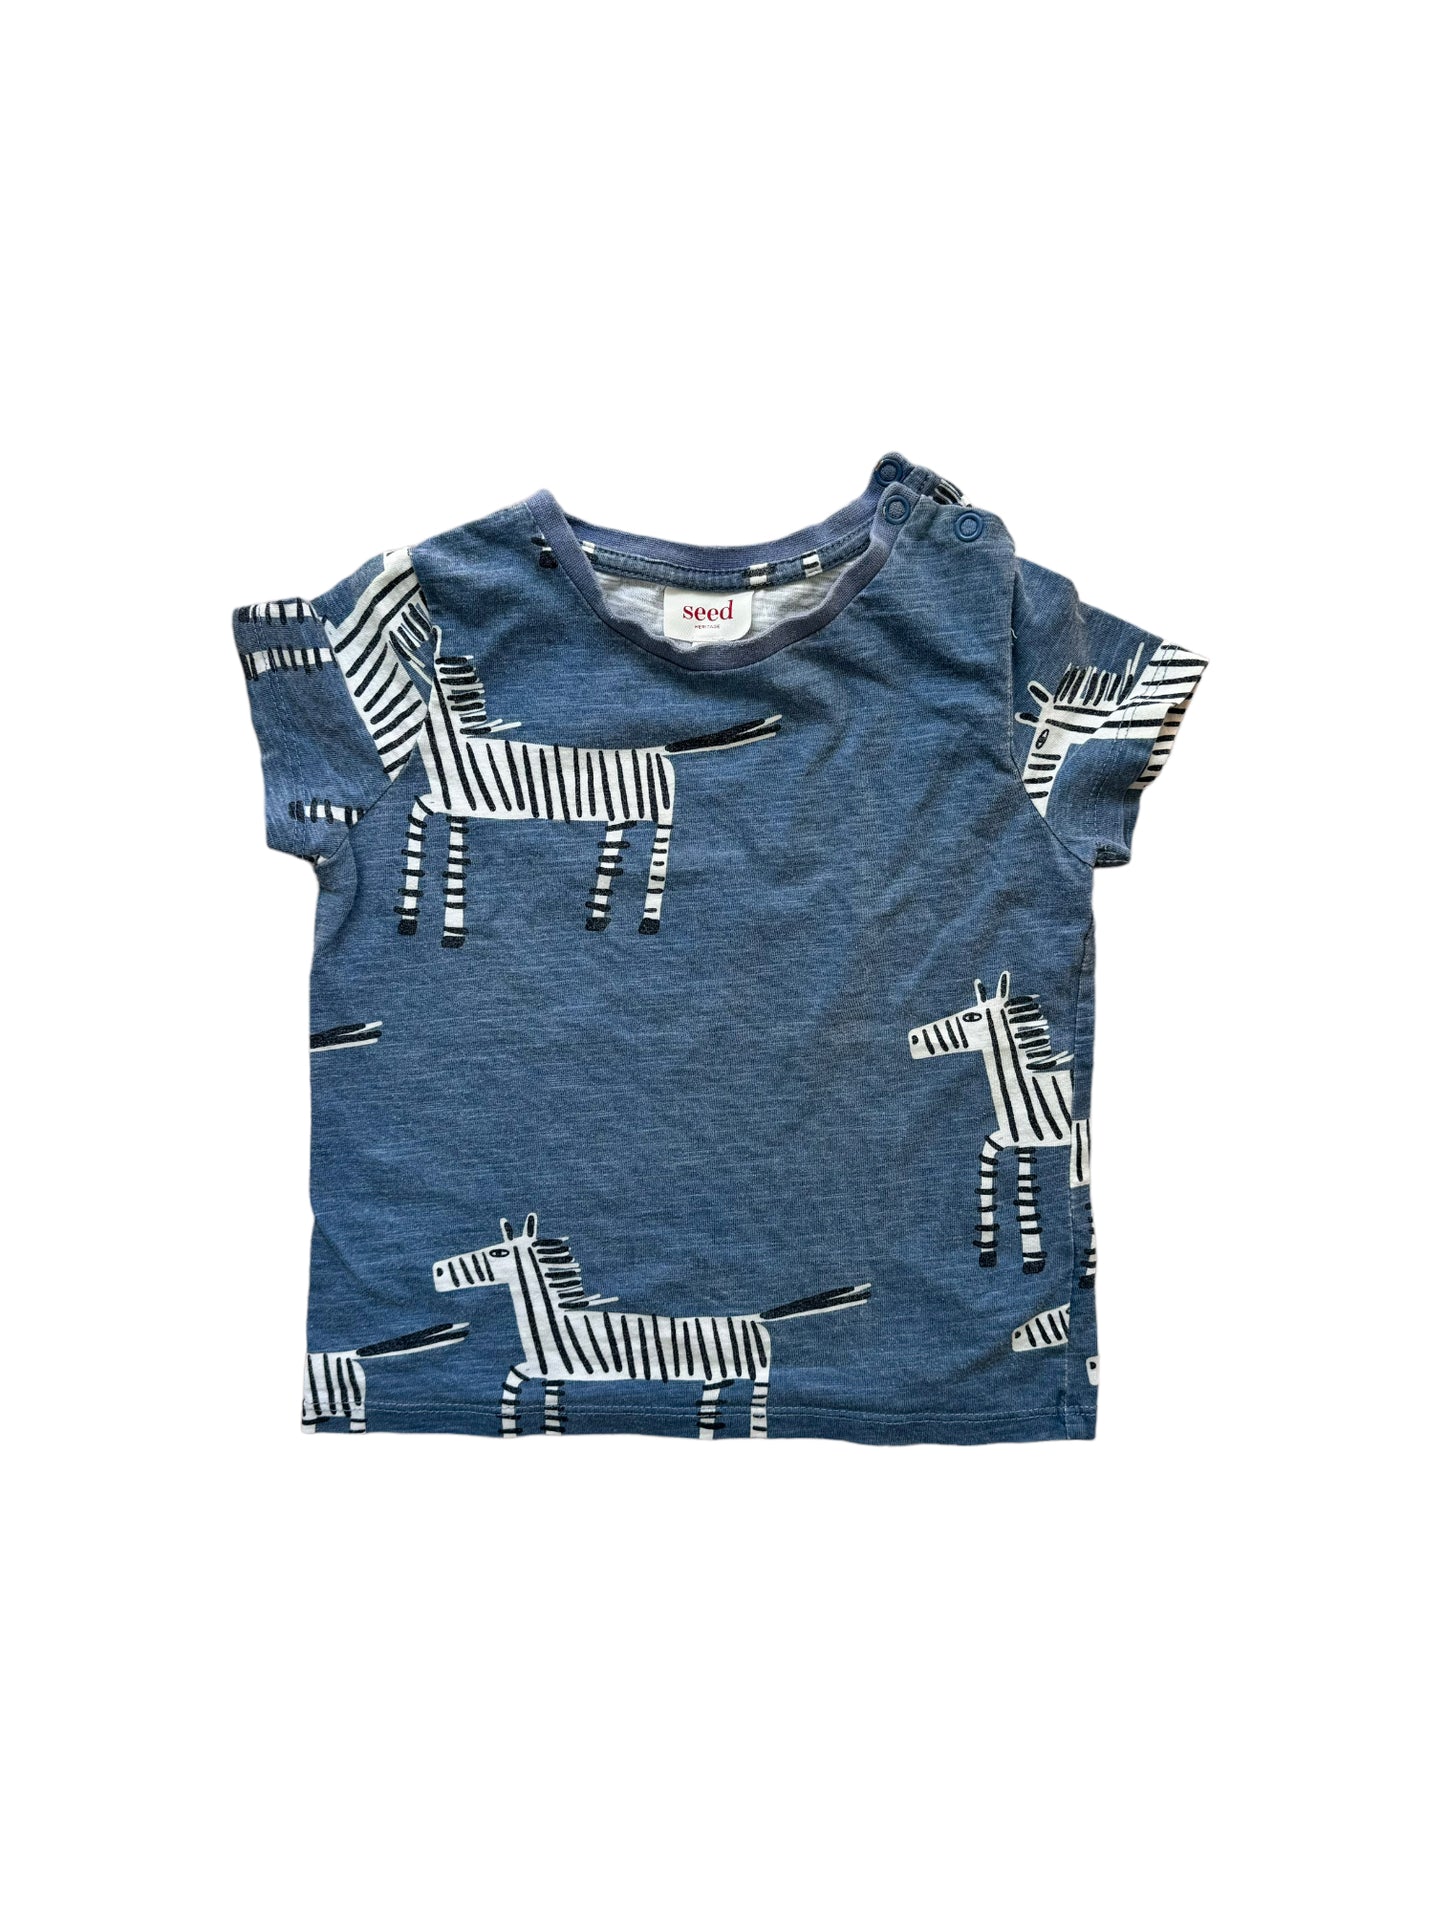 Seed t-shirt | Size: 2 years | GUC